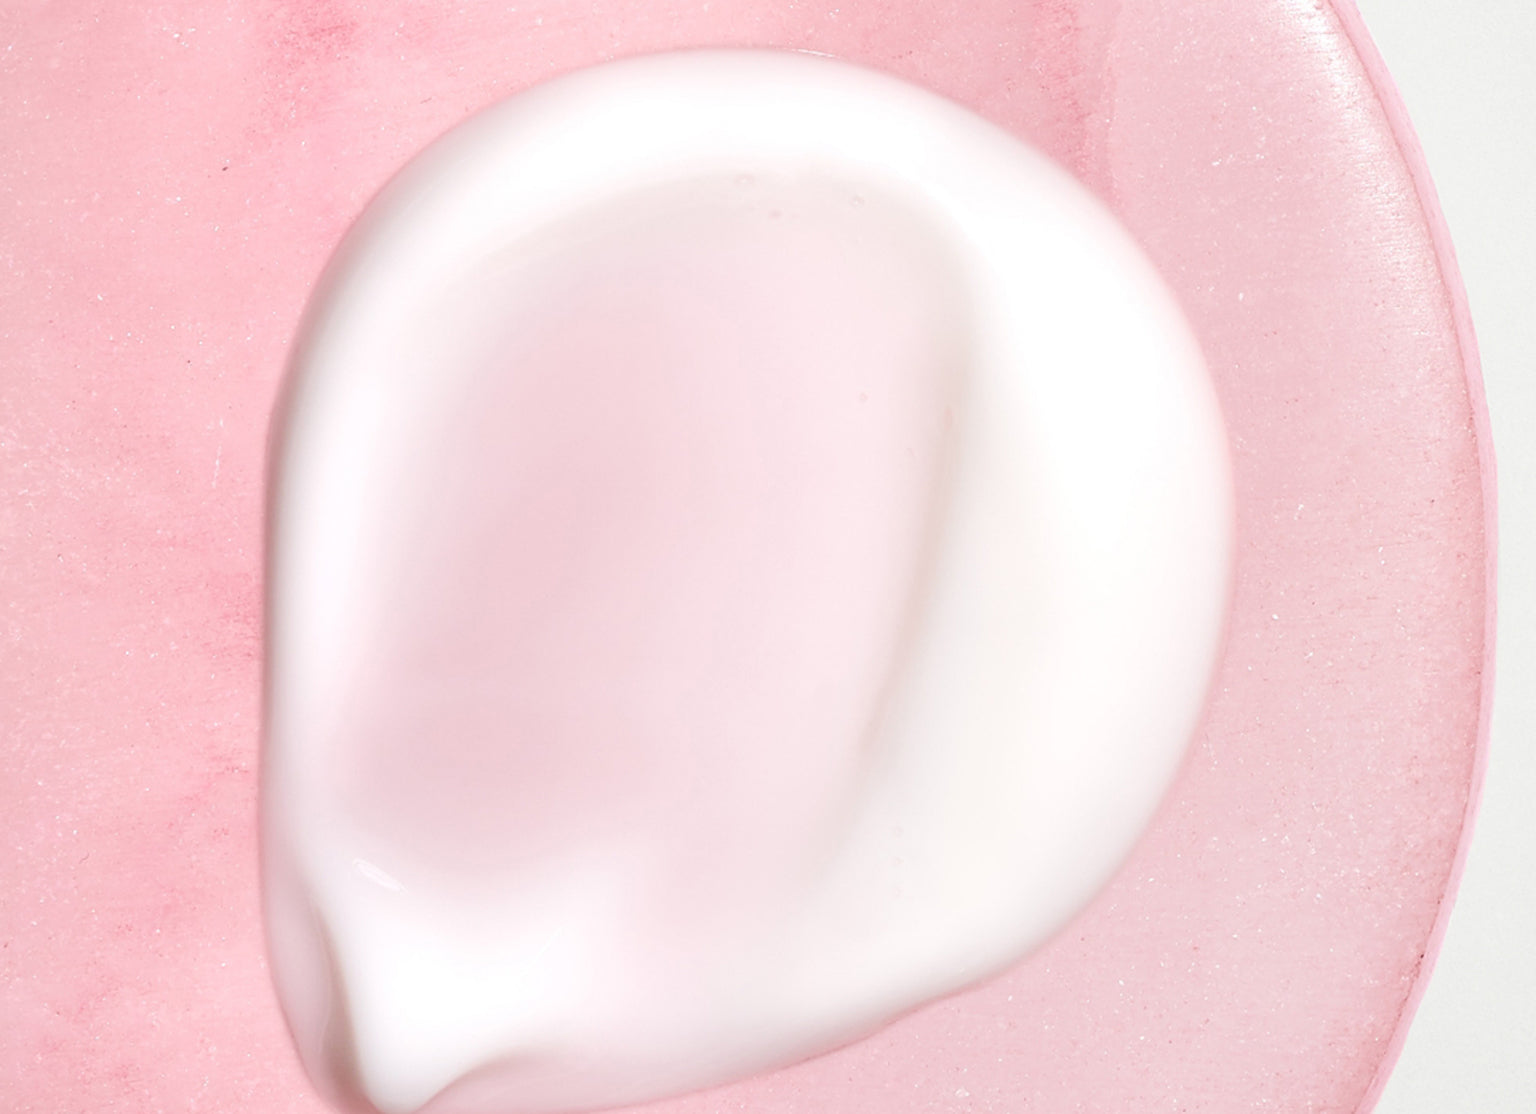 Swatch of Heat protectant creme on a pink background. 